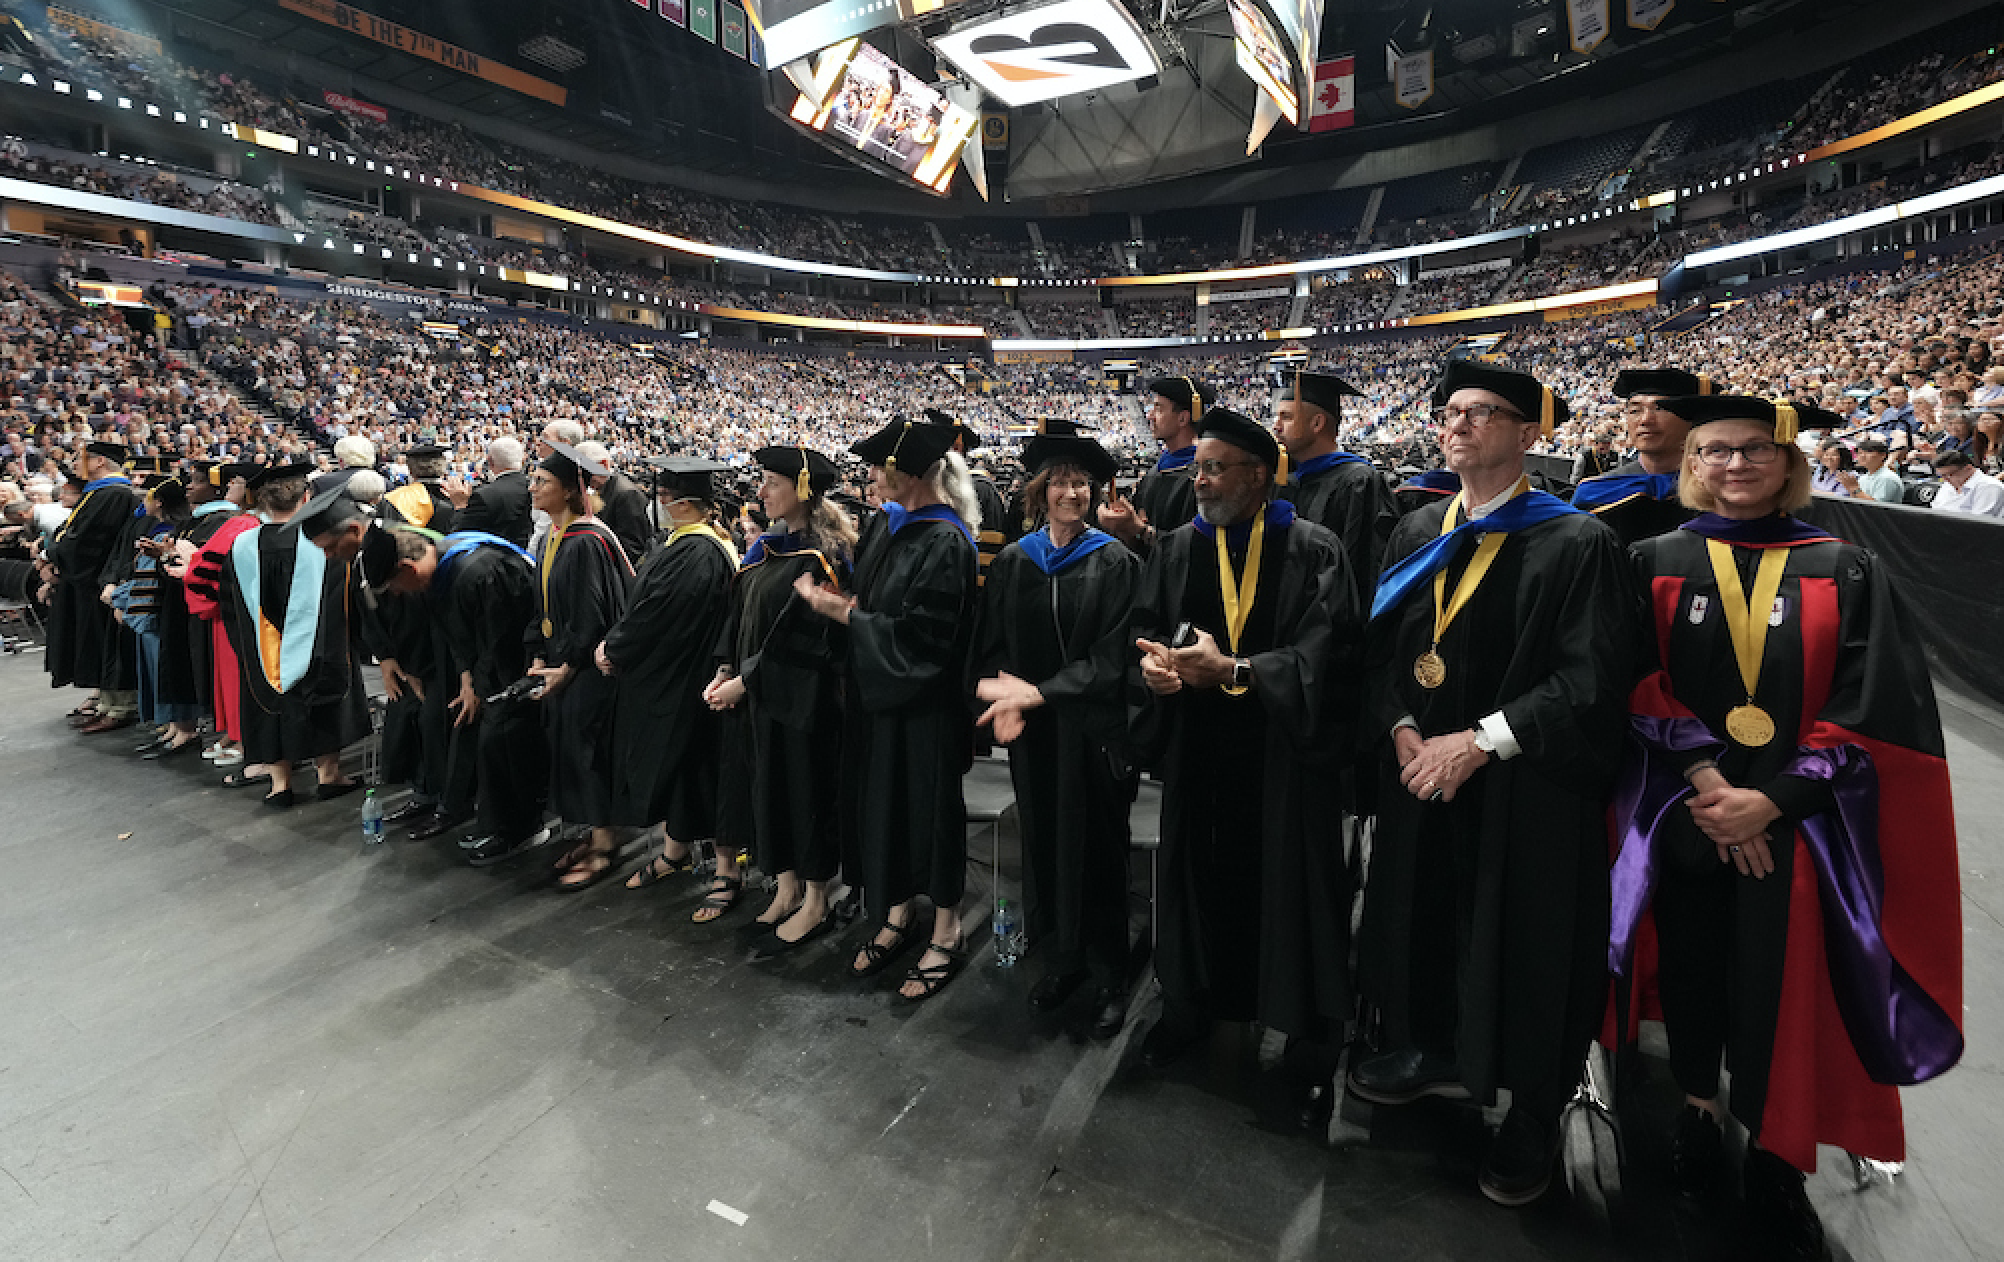 Vanderbilt University honored 33 retiring faculty members and four outgoing deans for their years of service during Commencement exercises at Bridgestone Arena on May 12. (John Russell/Vanderbilt)